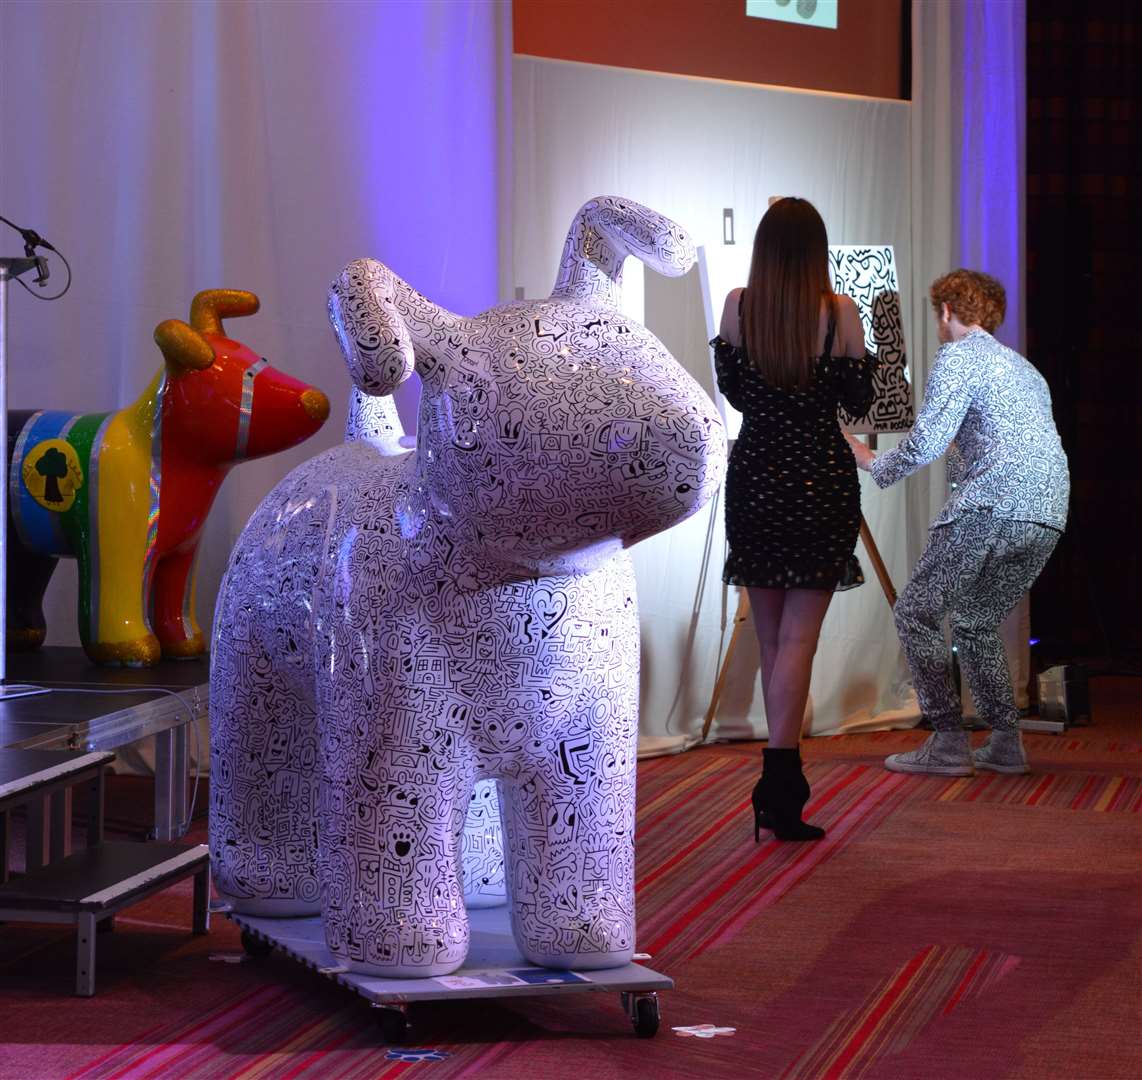 The sale of a Snowdog covered in his unique style brought in £15,000 for Pilgrims Hospices